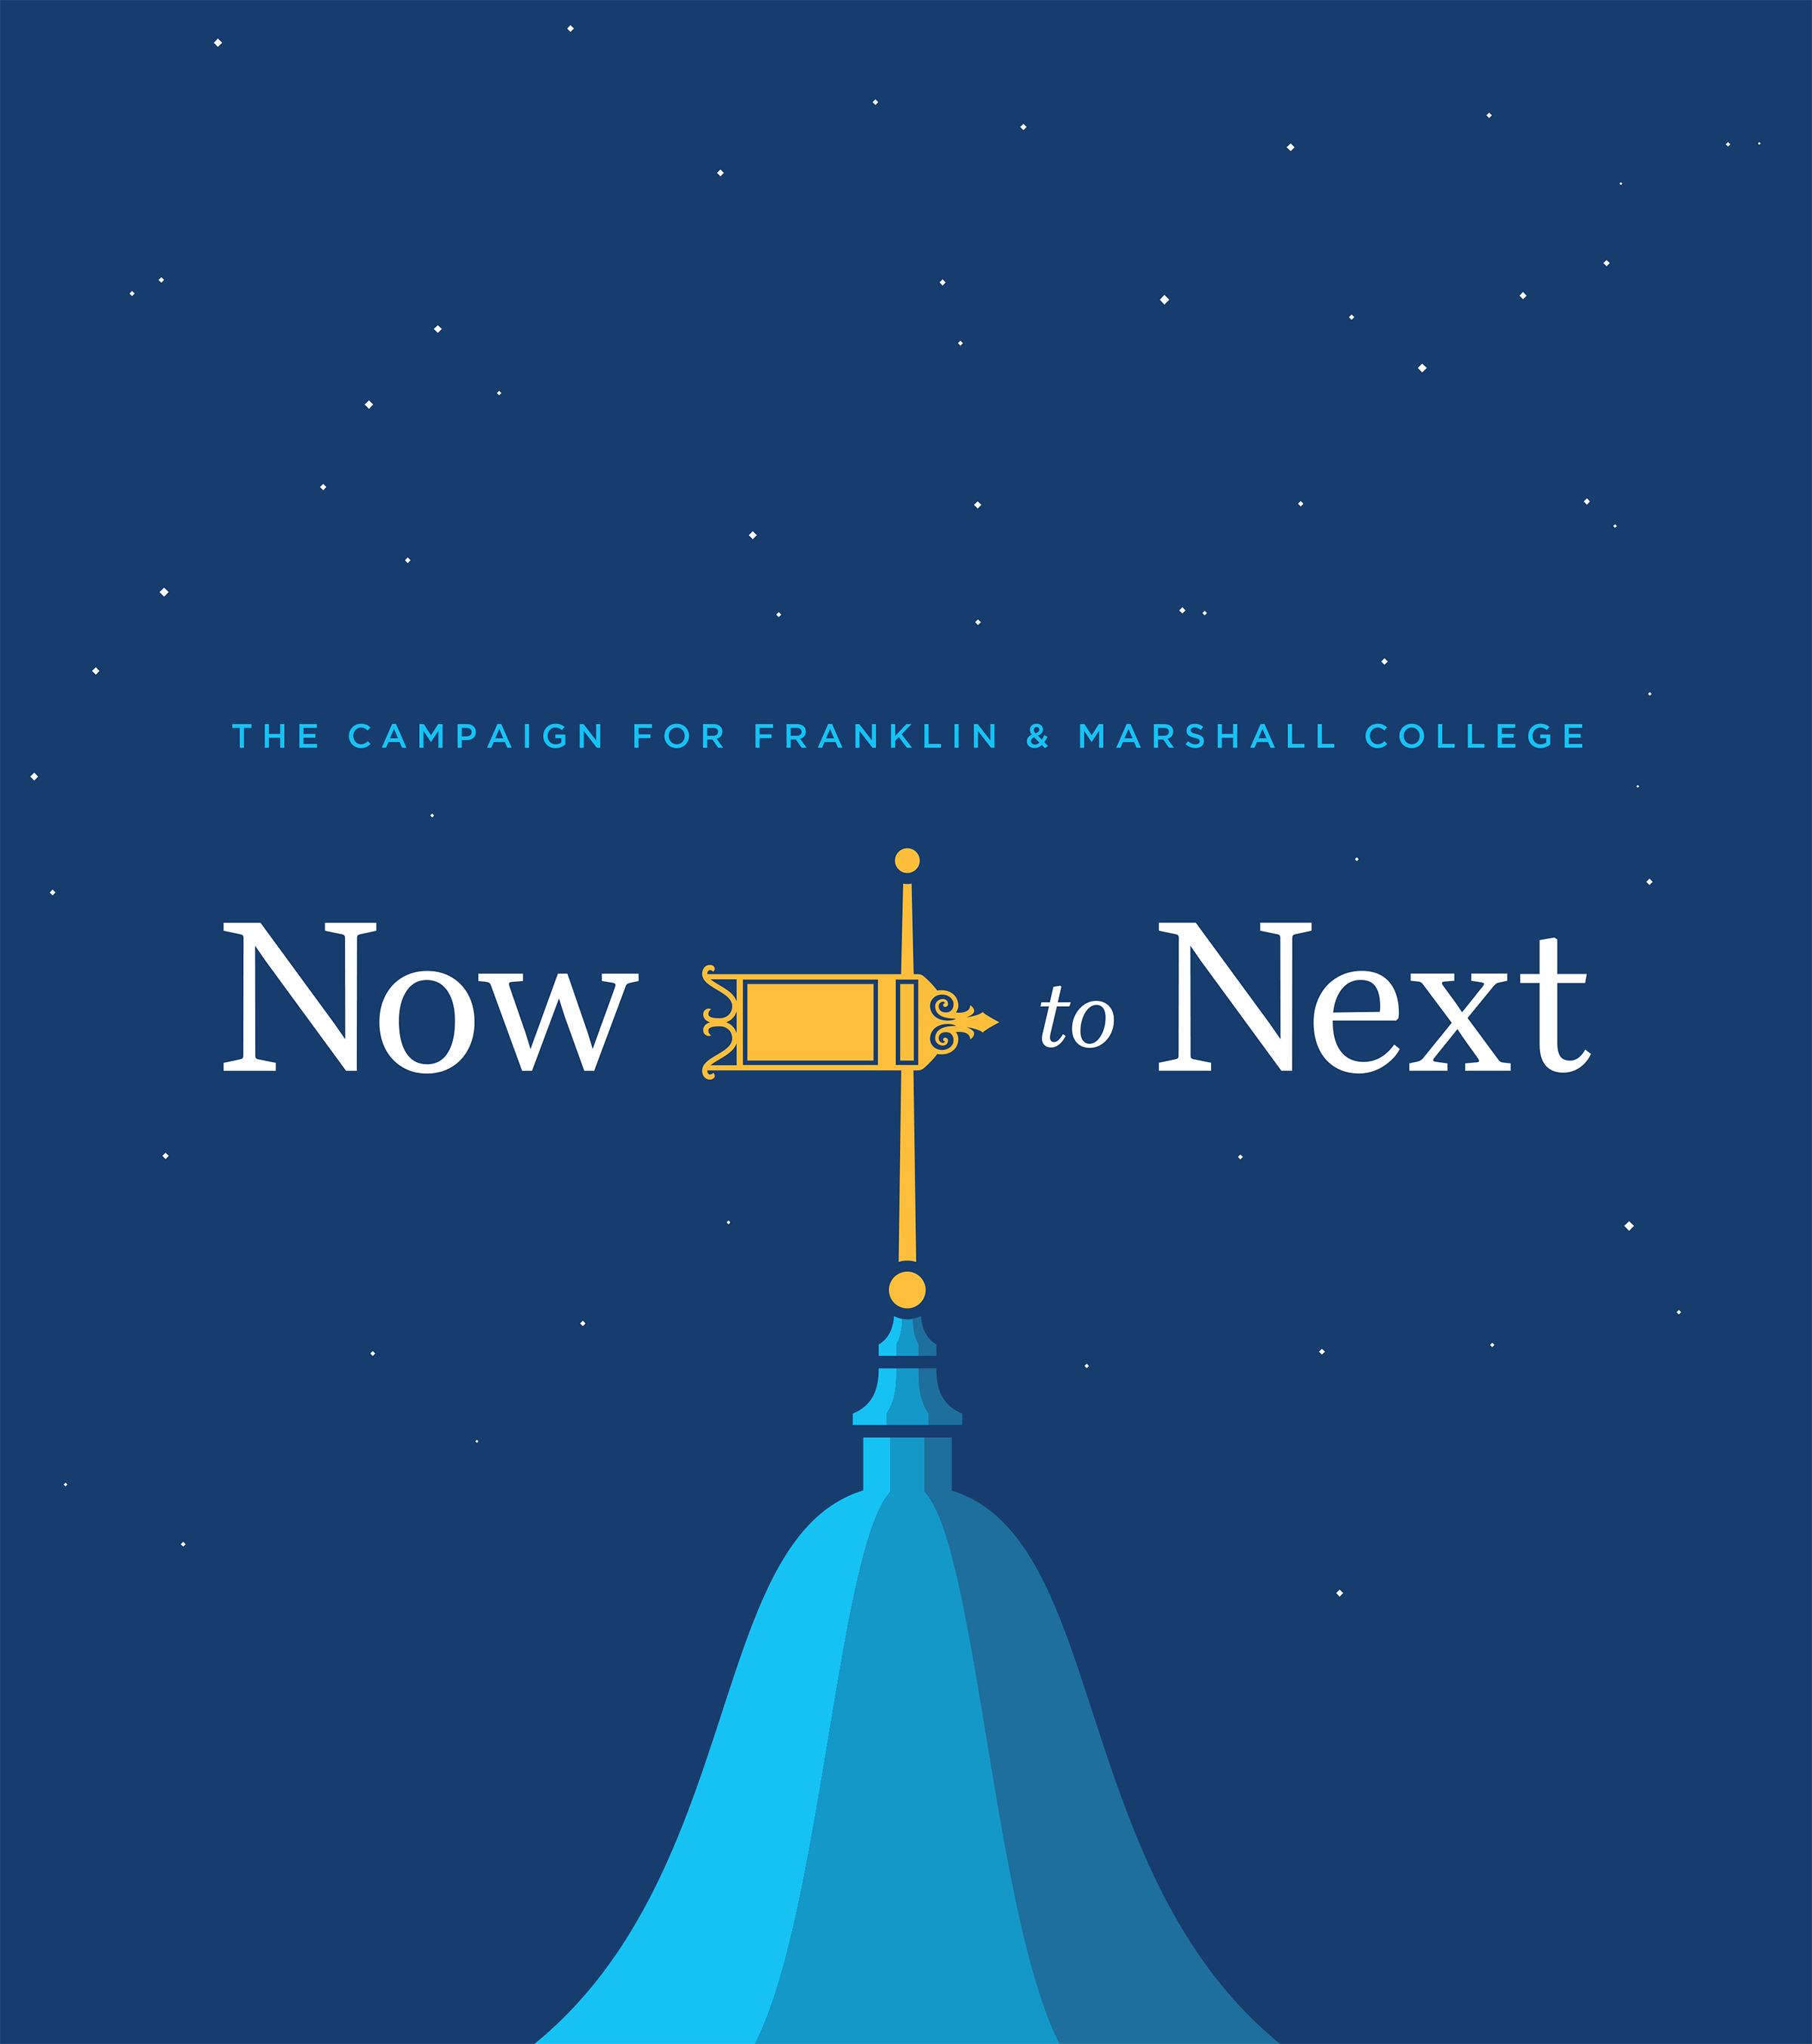 The “Now to Next” Campaign